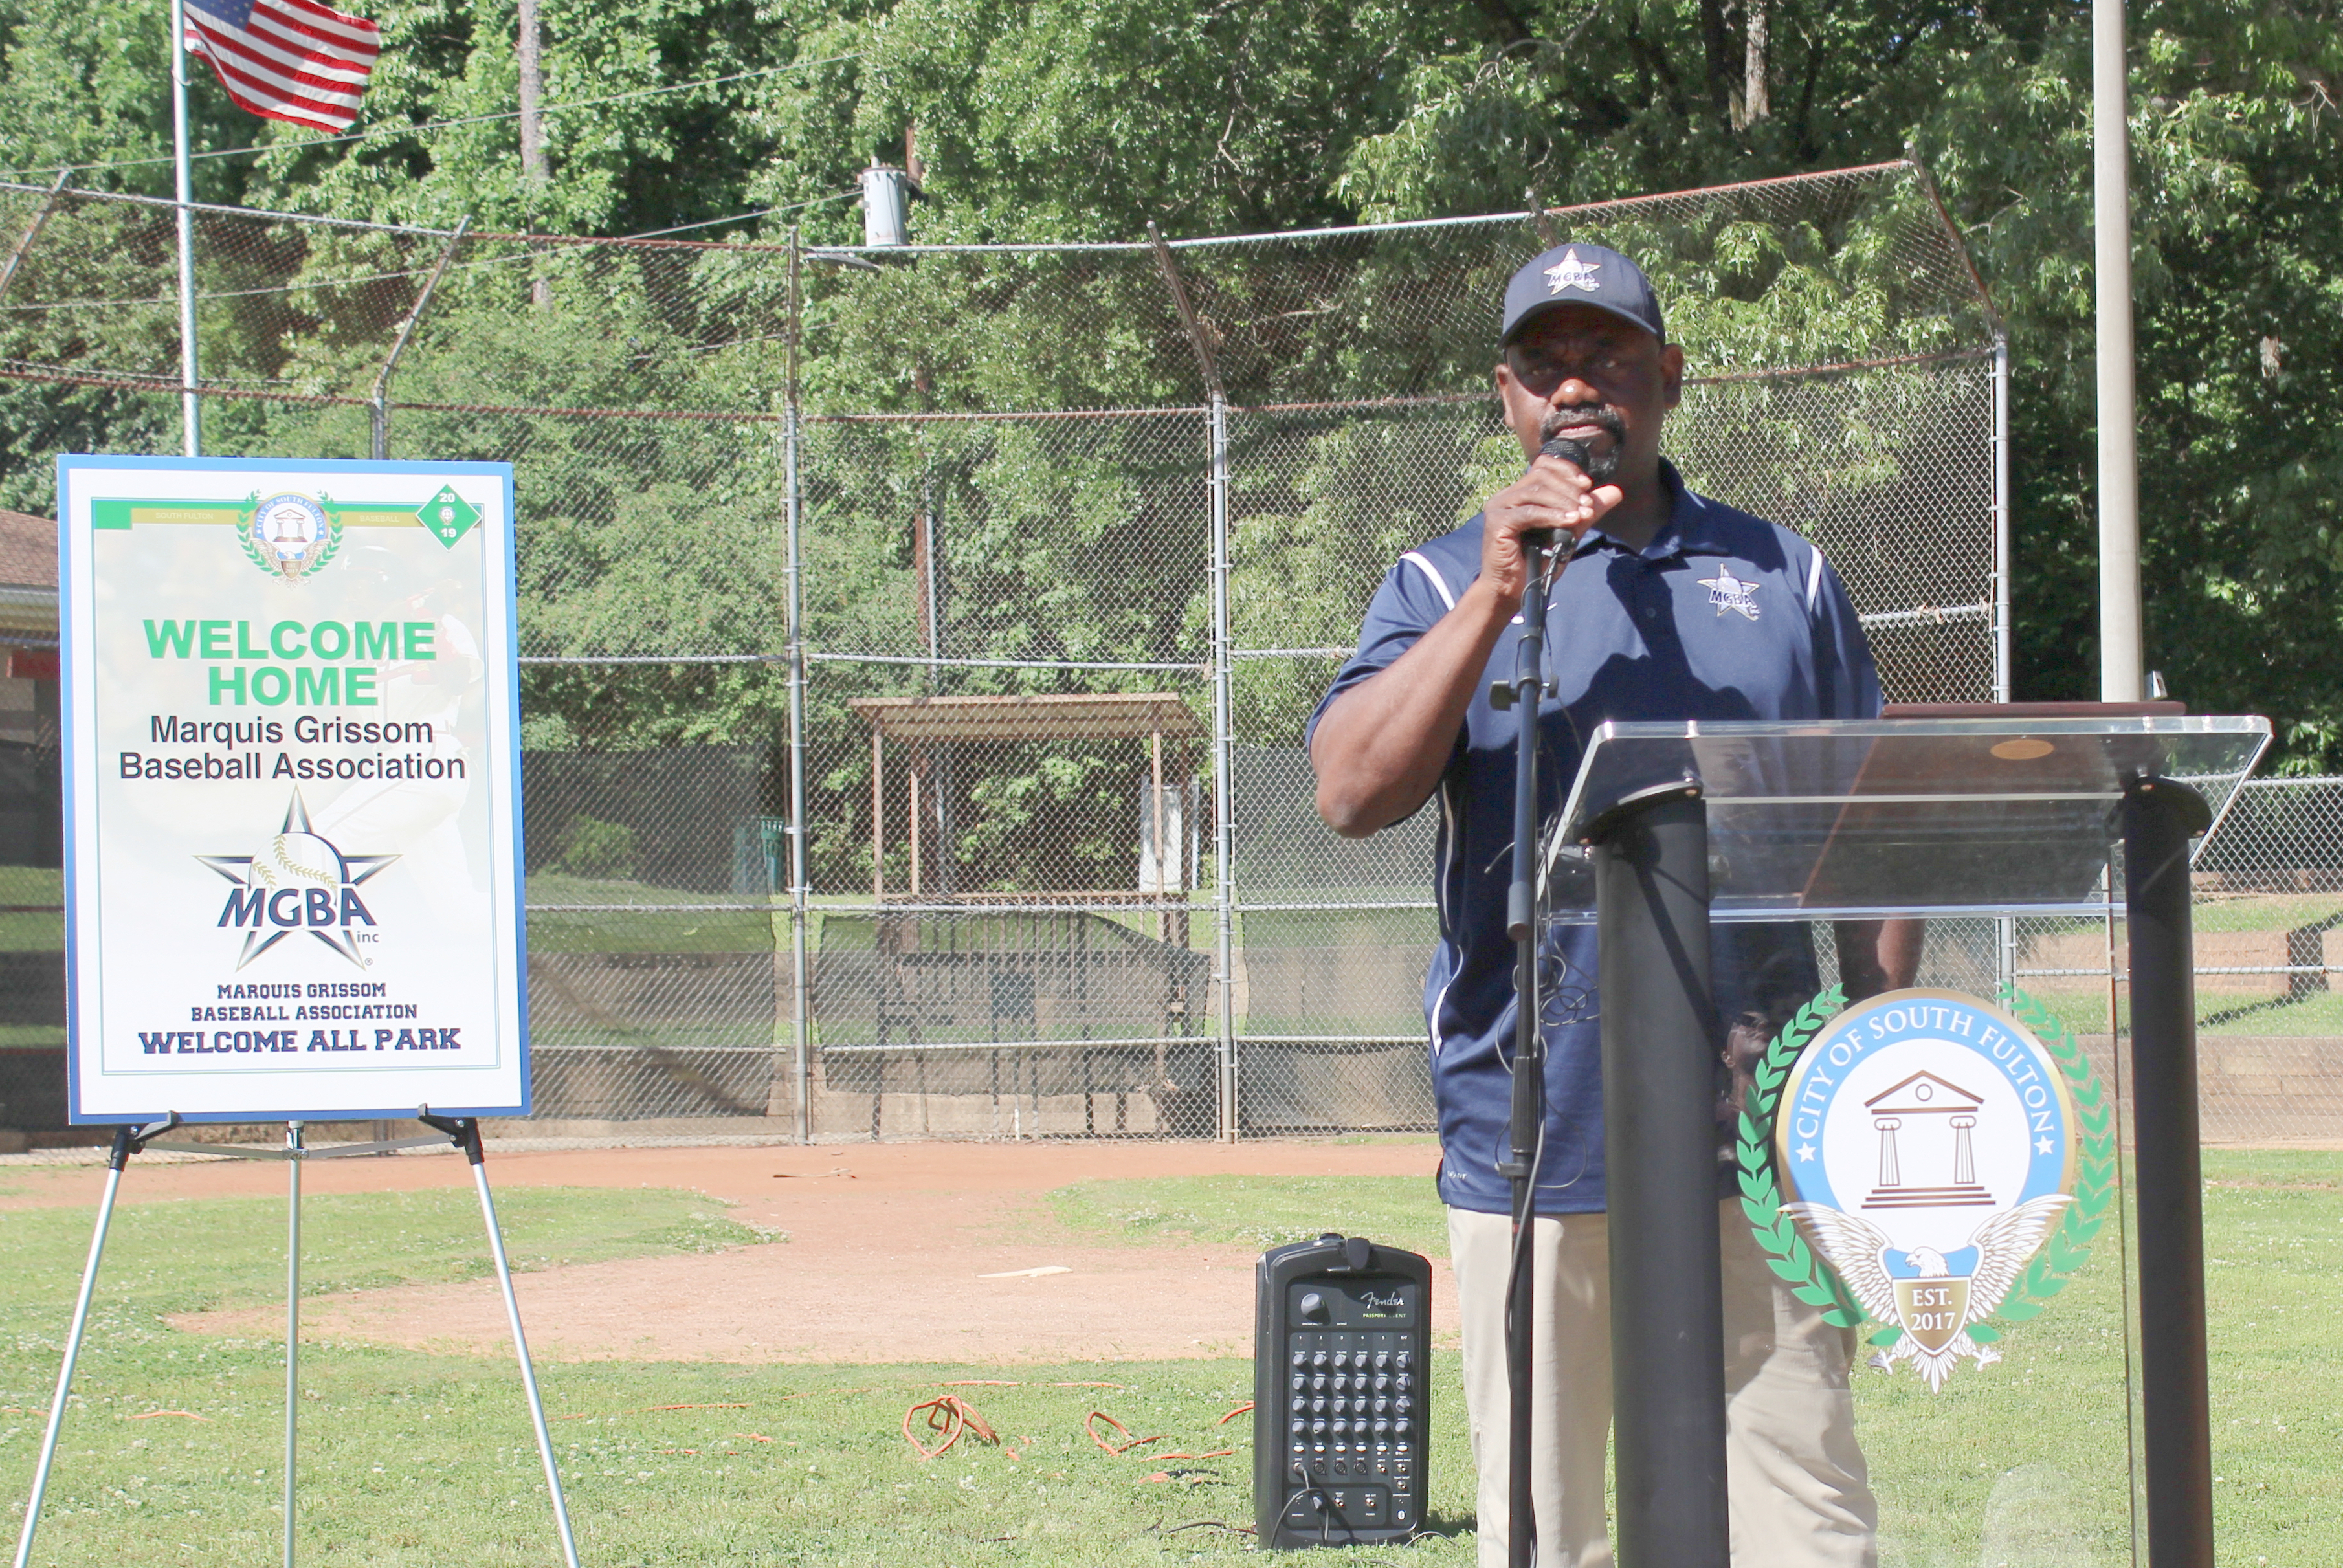 MLB Great Marquis Grissom Launches Fall Baseball League at Welcome All Park